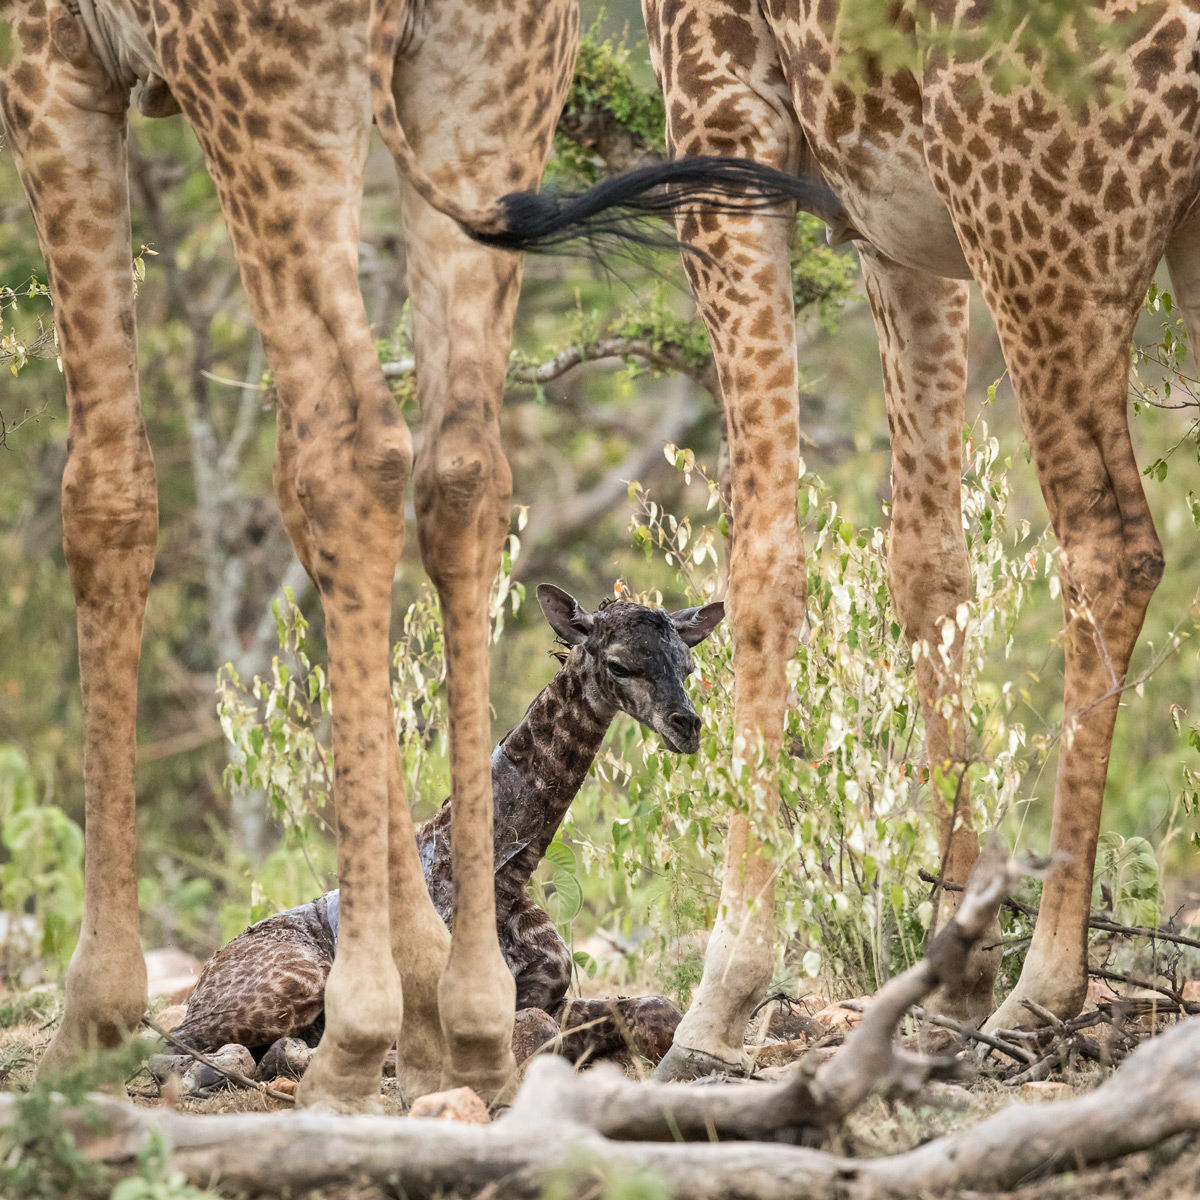 A vulnerable newborn giraffe sits under the protection of its mother and a male that had kept a nearby watch during the birth before moving over to greet the new family member, Maasai Mara National Reserve, Kenya © Kellie Netherwood